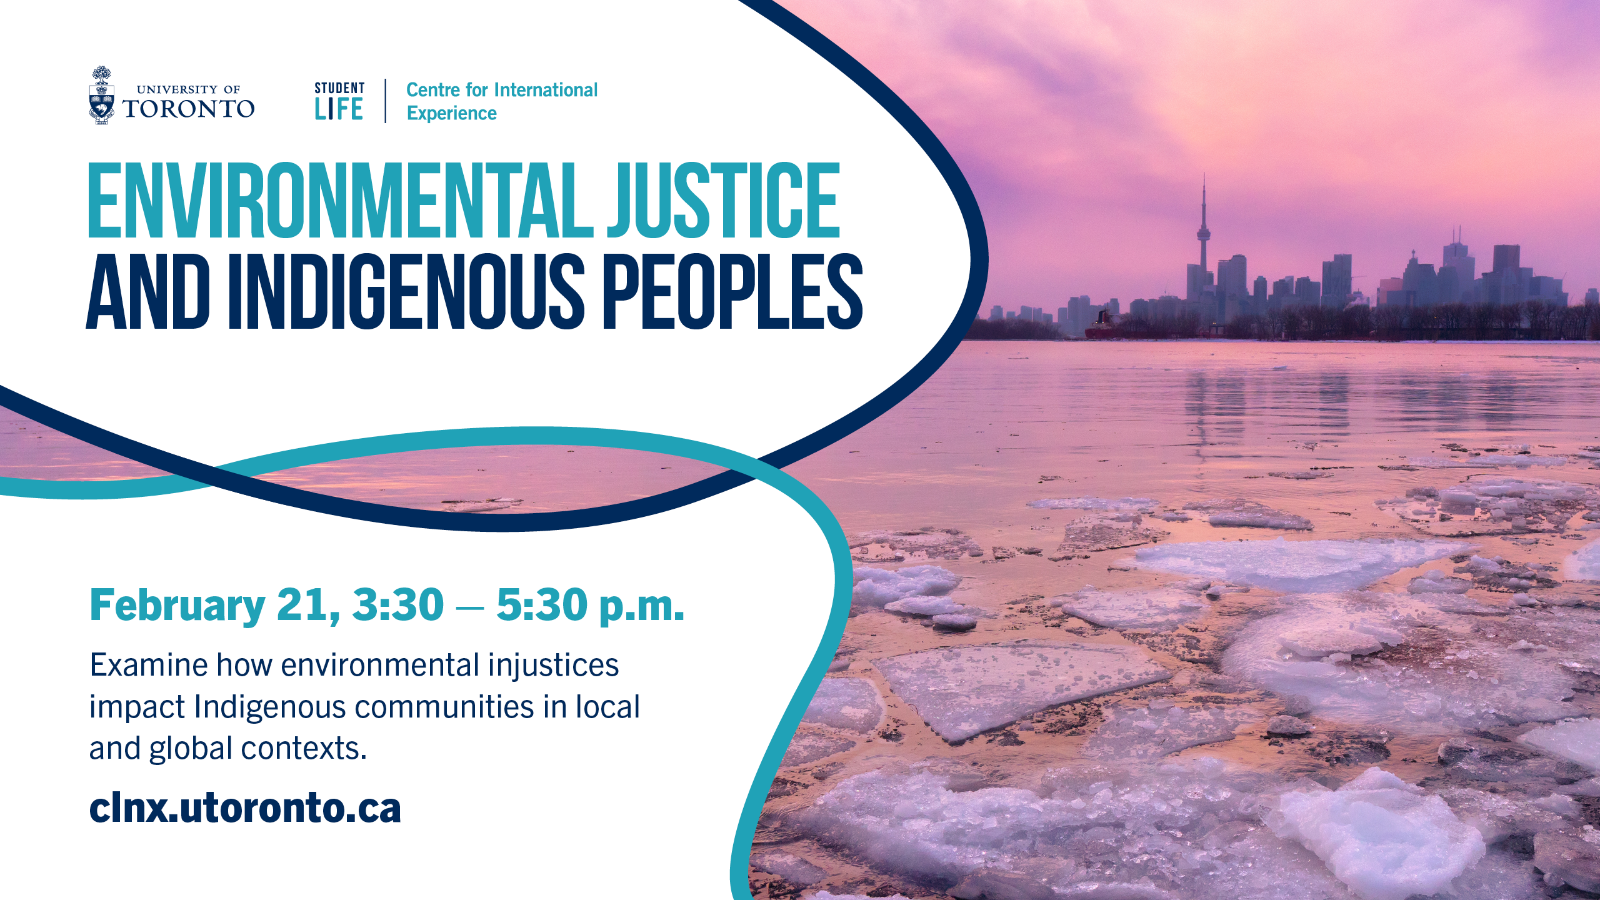 A photo of Toronto skyline viewing from the lake (with frozen ice pieces), with text, "Environmental Justice and Indigenous Peoples; February 21, 3:30 - 5:30 p.m. Examine how environmental injustices impact Indigenous communities in local and global contexts."